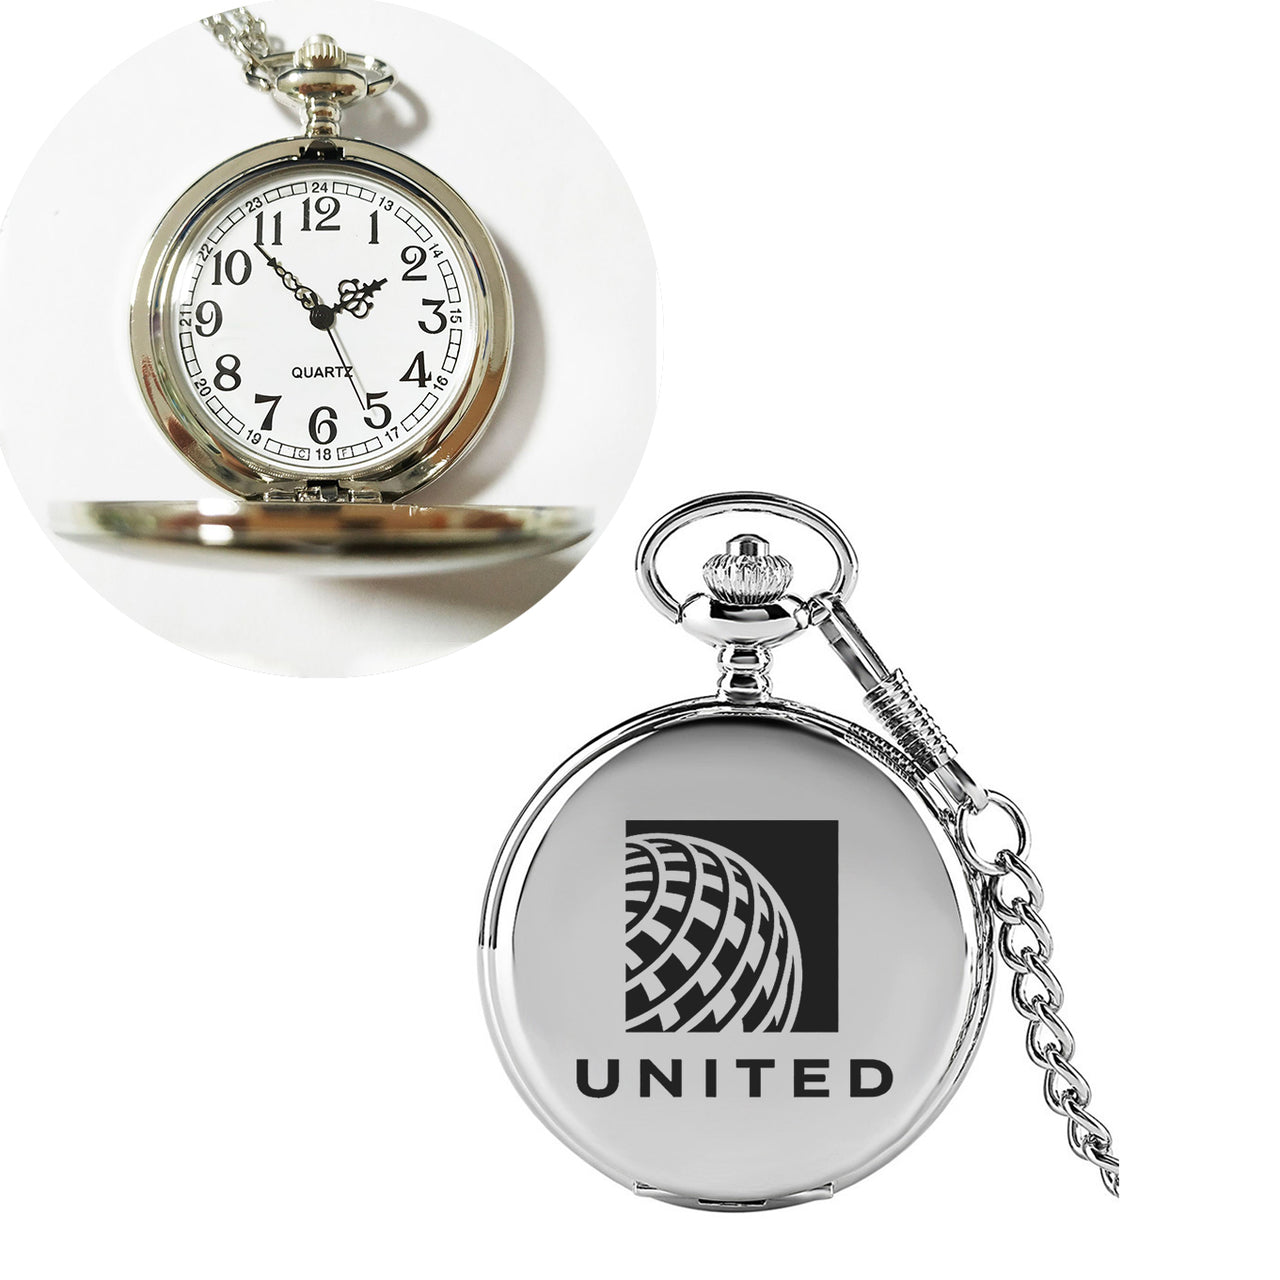 United Airlines Designed Pocket Watches